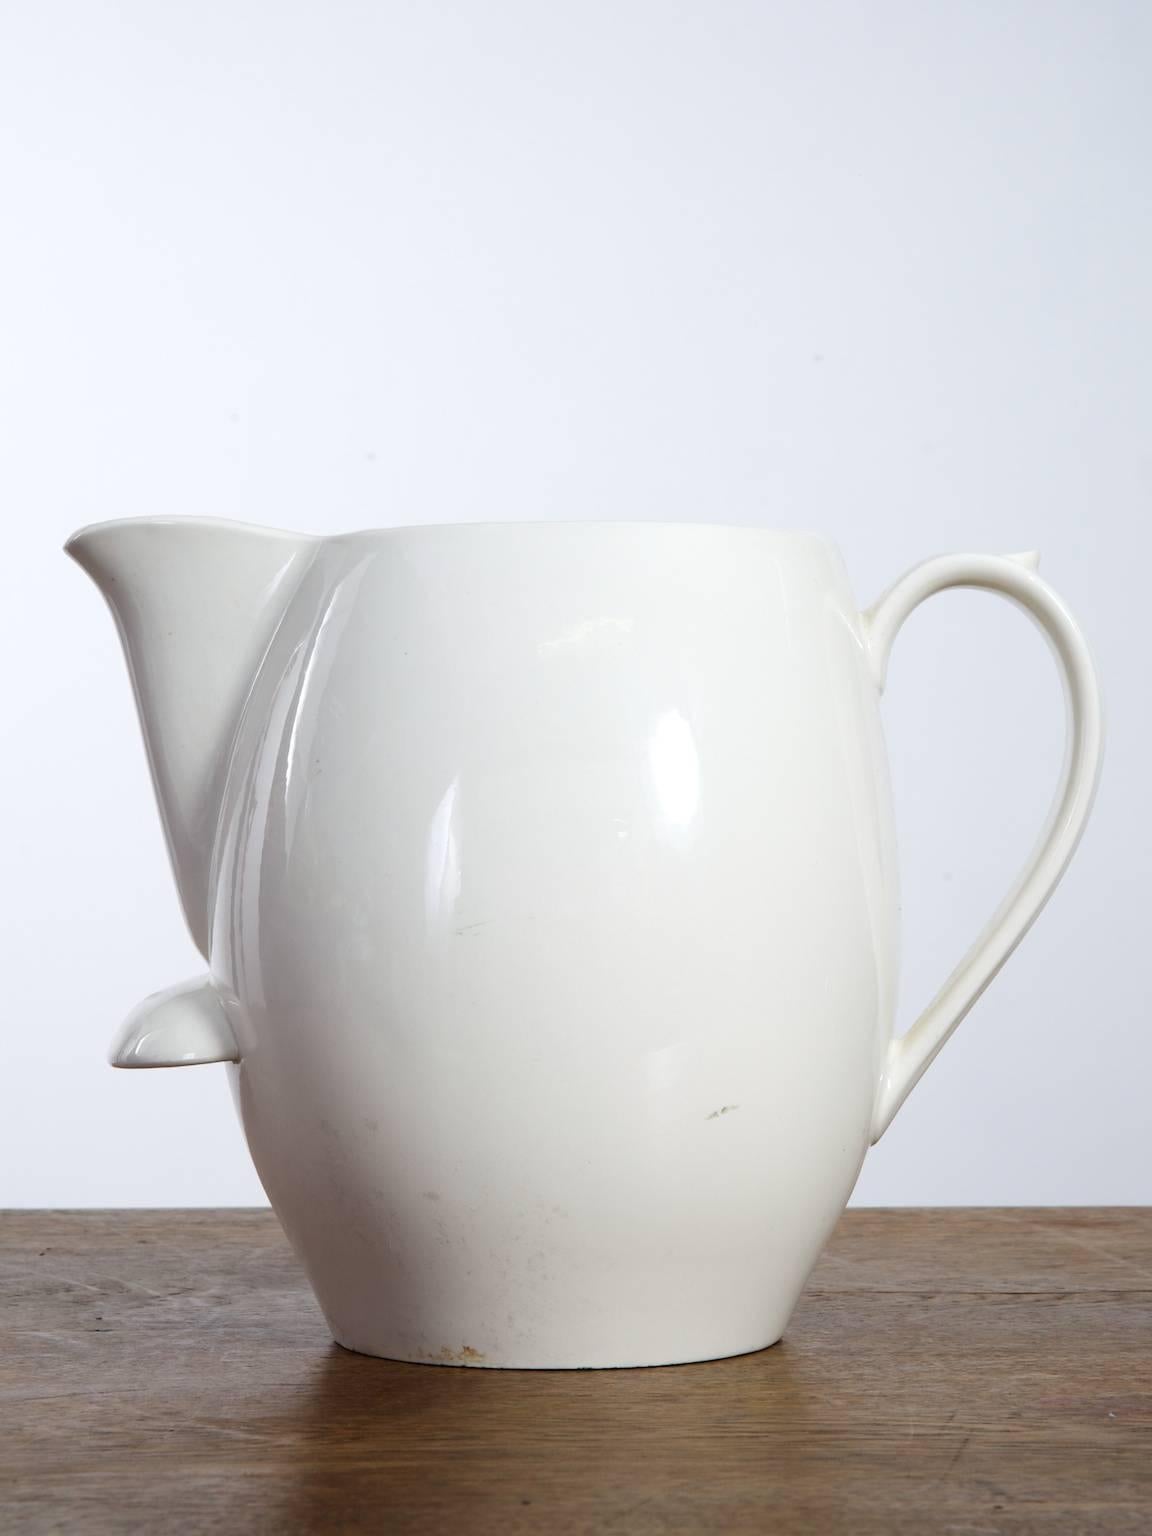 Large Ironstone Milk Jug In Good Condition For Sale In Llandudno, Conwy